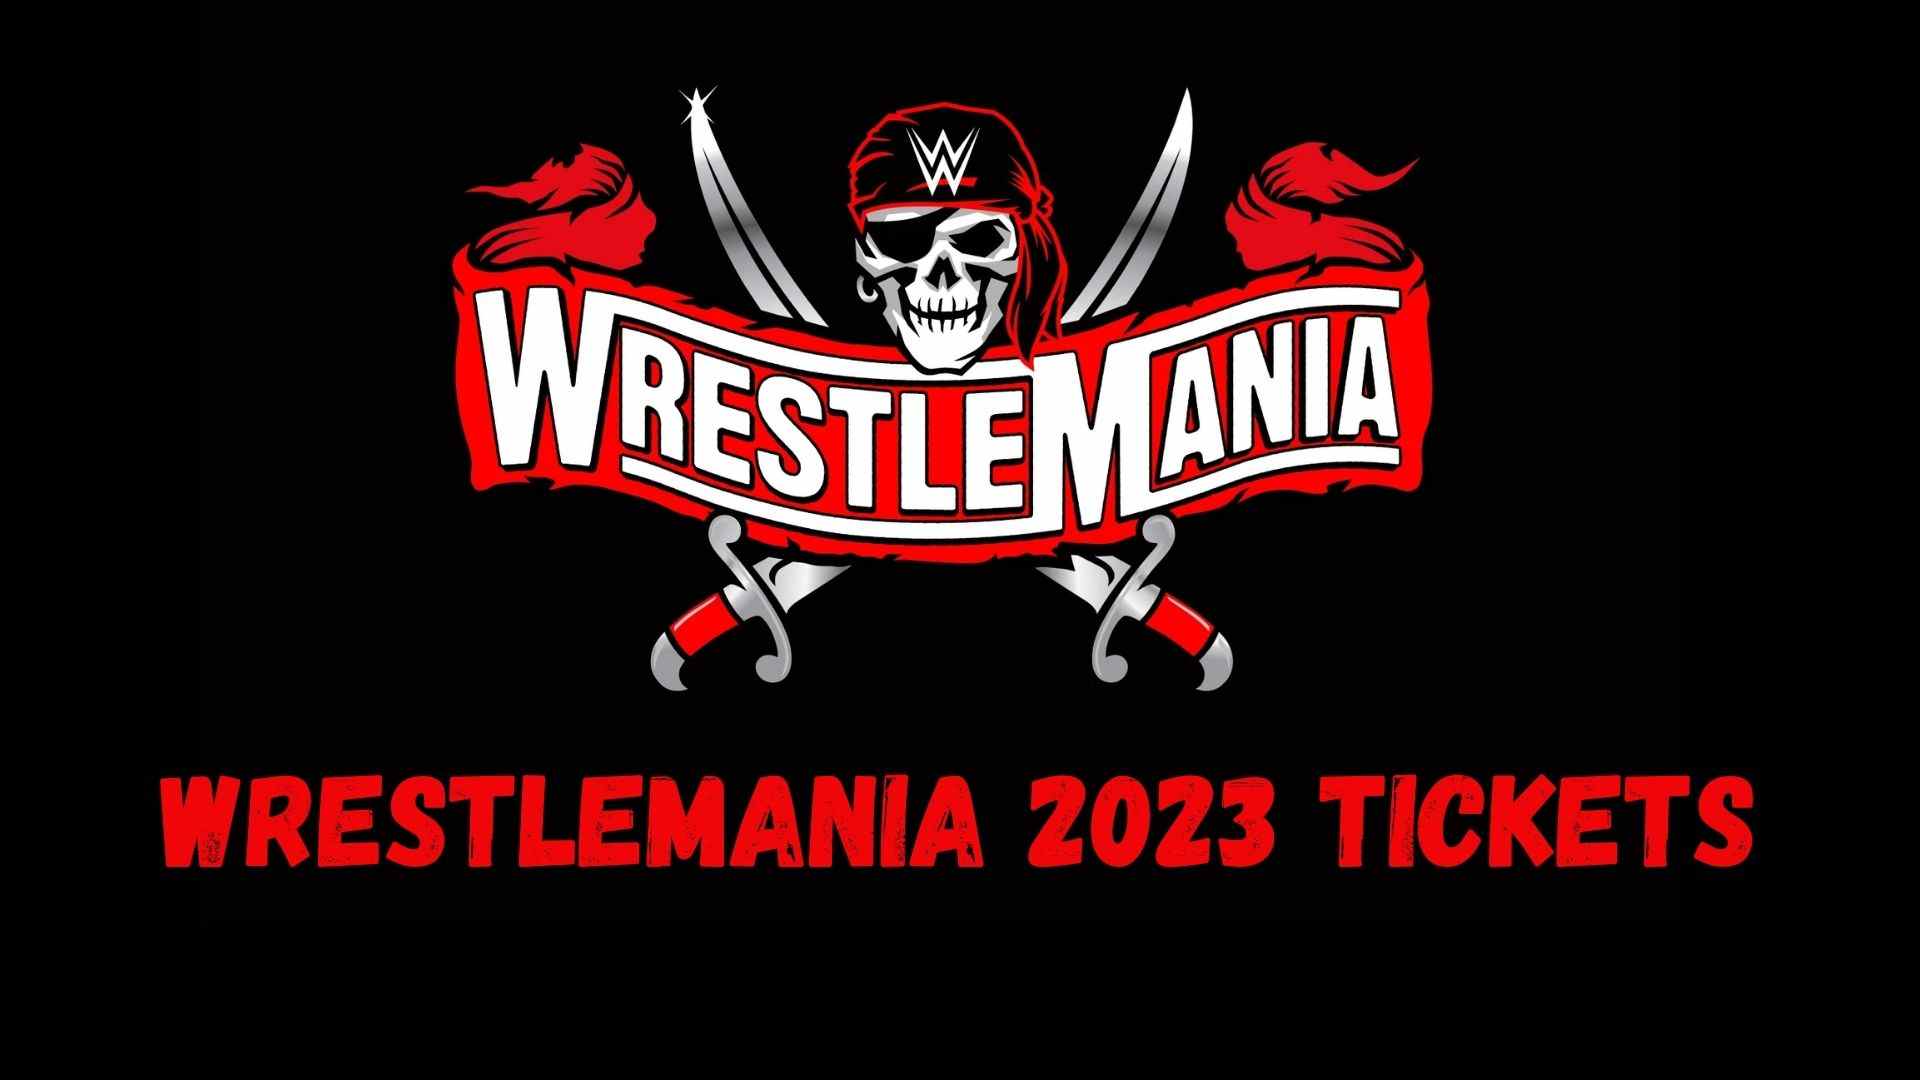 Wrestlemania 2023 Tickets Wallpaper and images